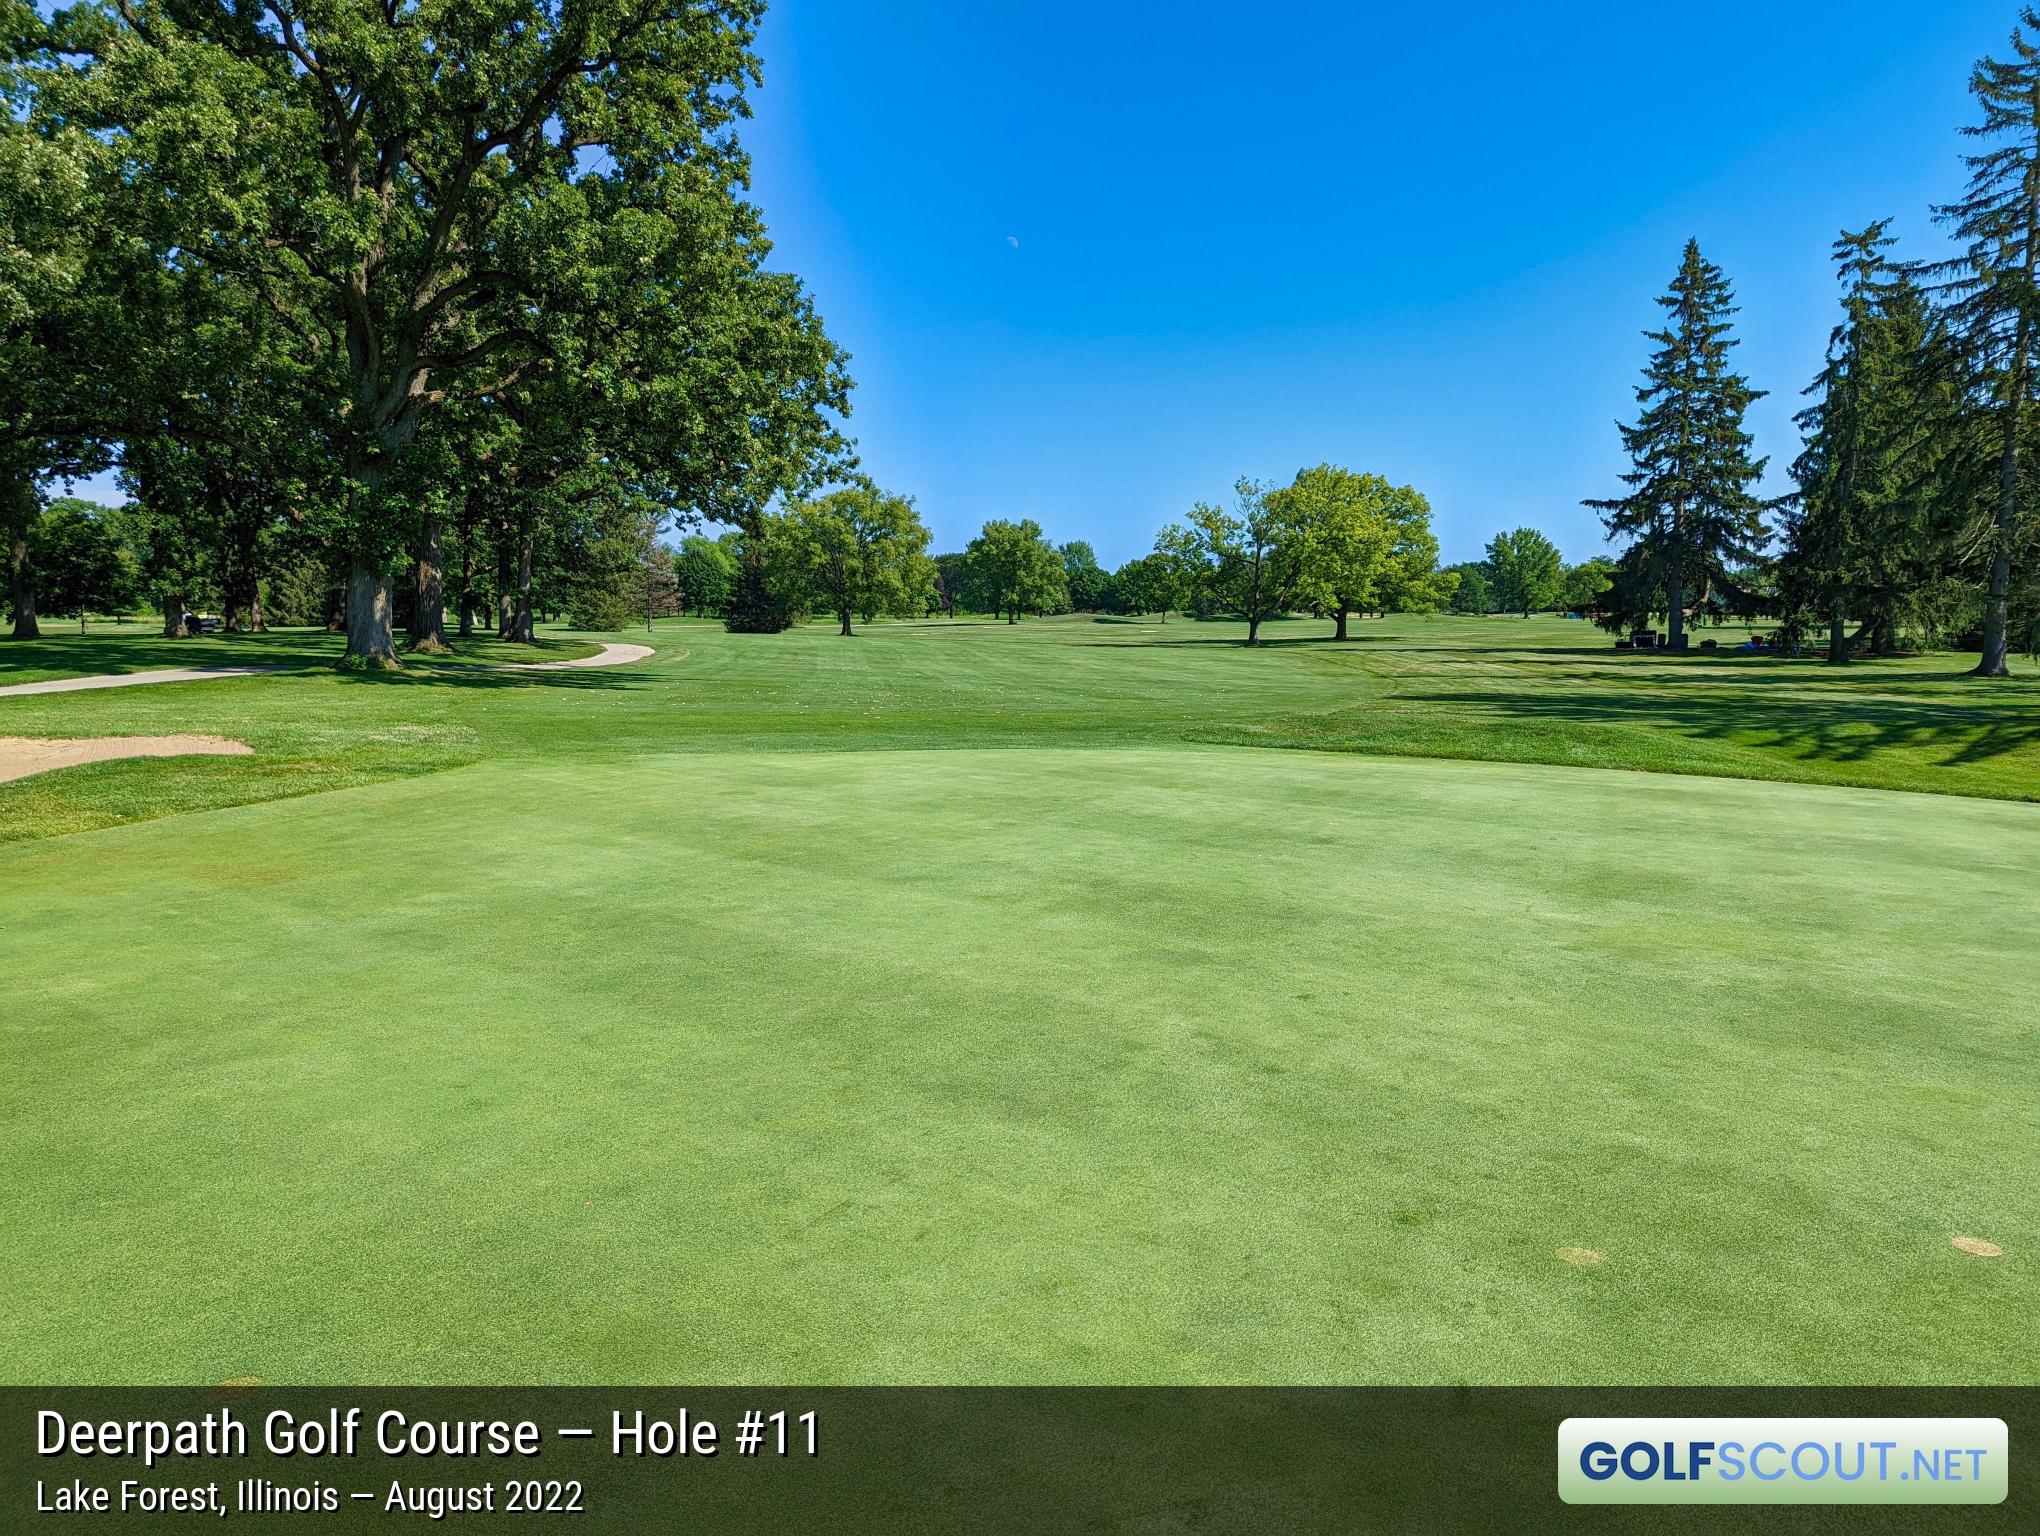 Photo of hole #11 at Deerpath Golf Course in Lake Forest, Illinois. 